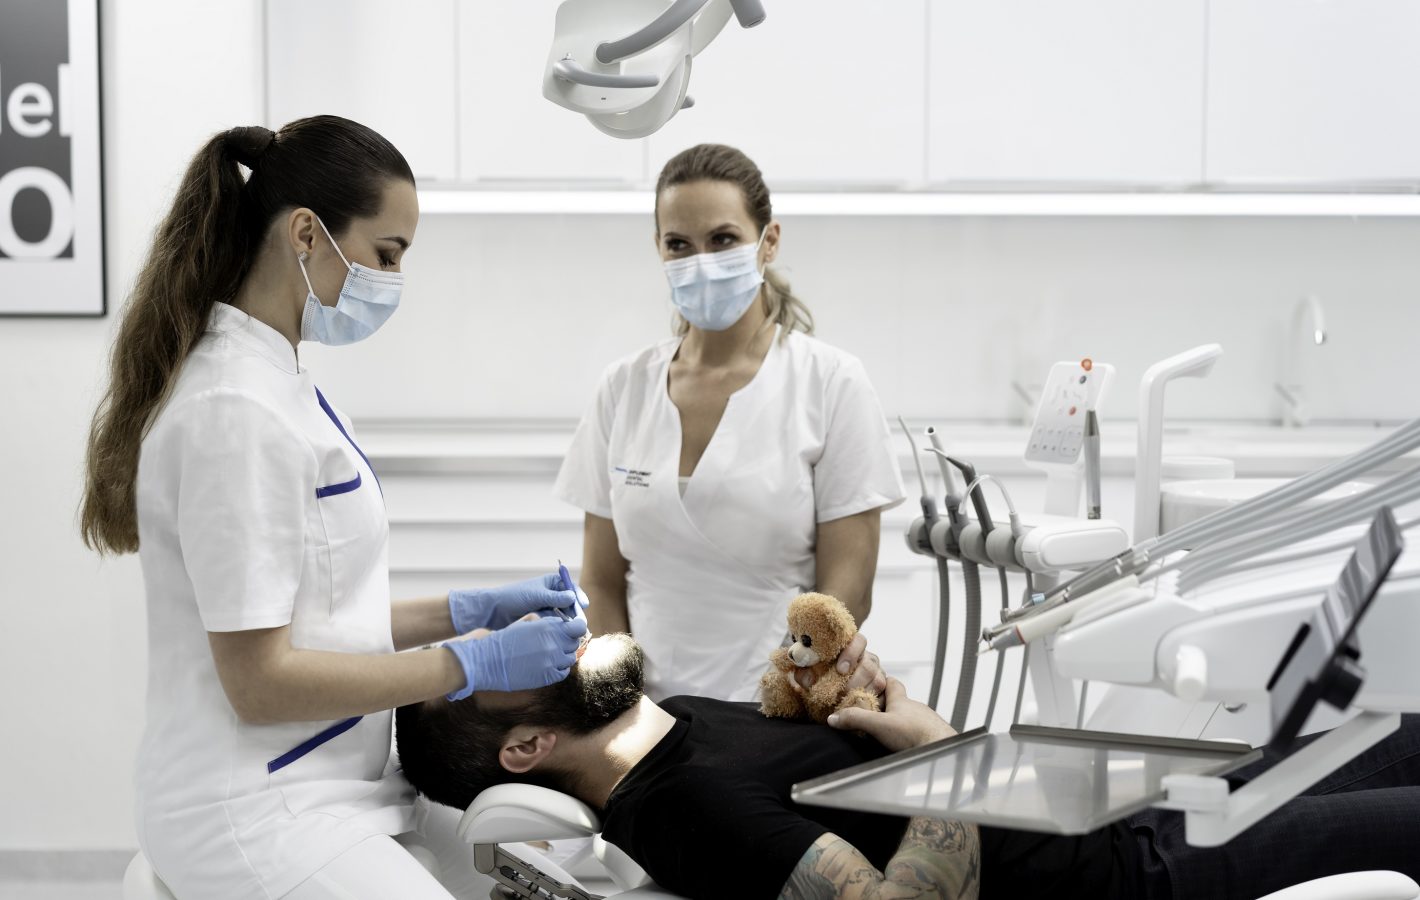 Diplomat Dental units will help take care of the health of every dentist. (fot: Diplomat Dental)